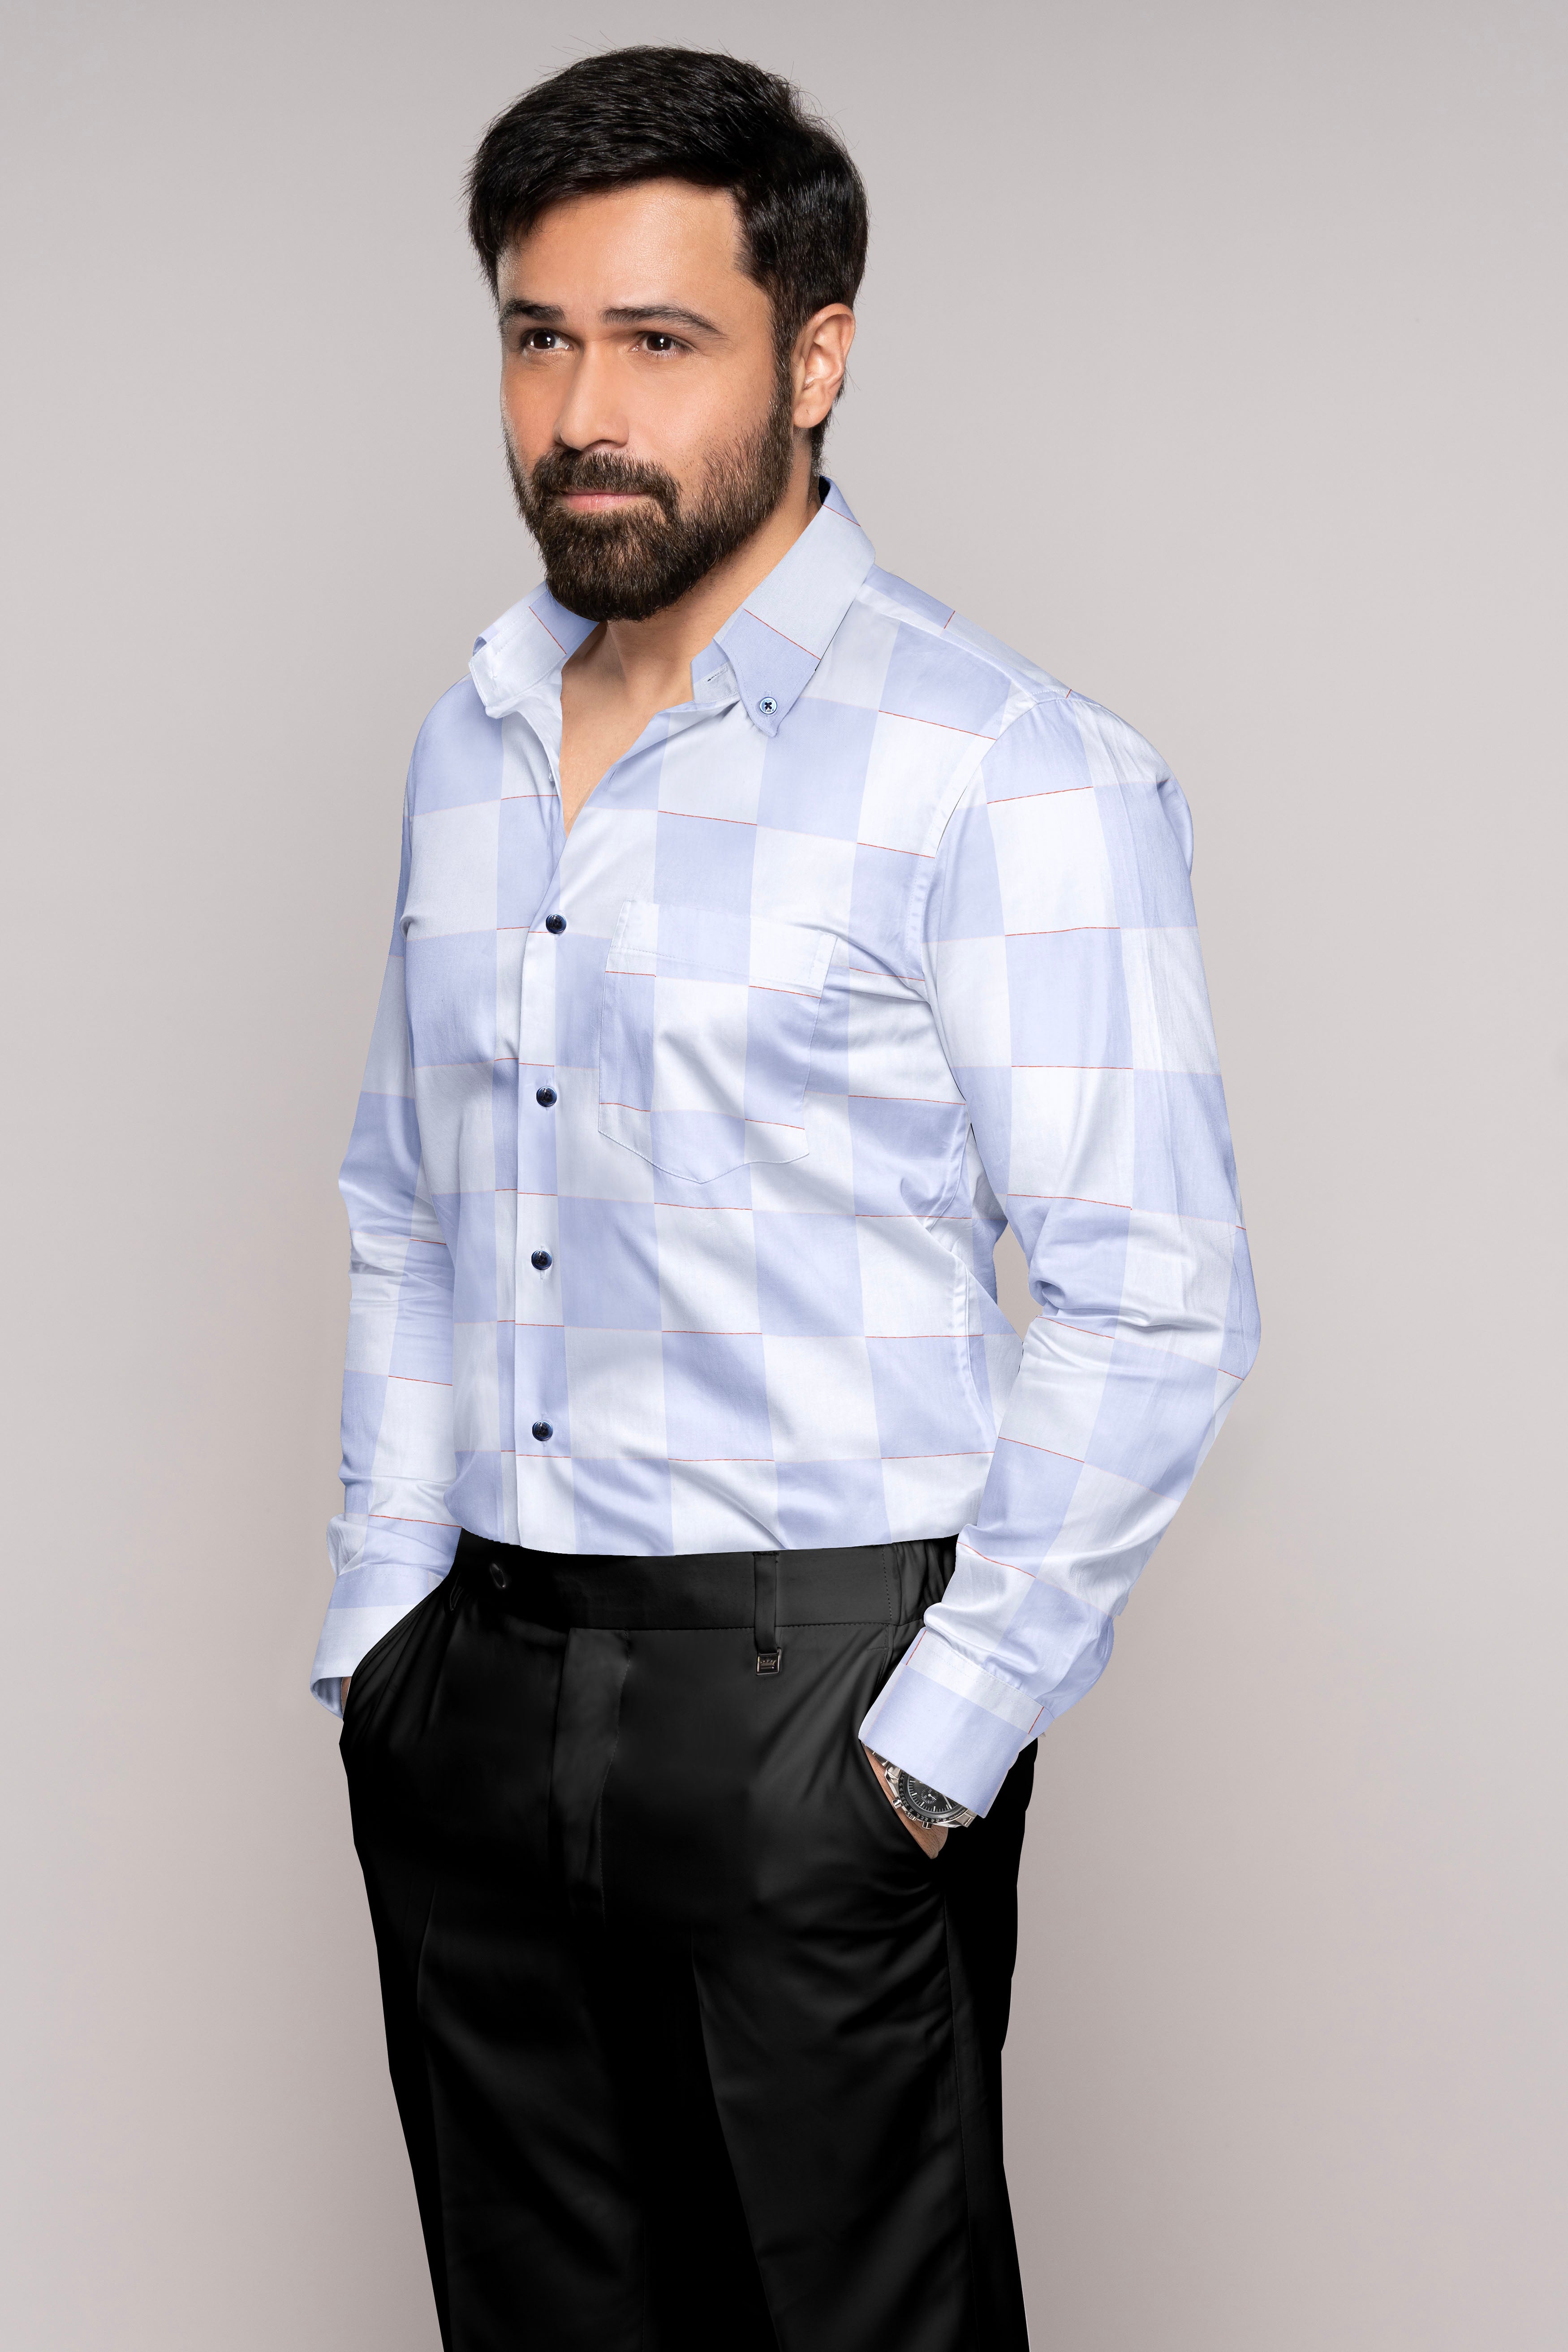 Combo Of 3 Slim Fit Cotton Fabric Check Shirts For Men